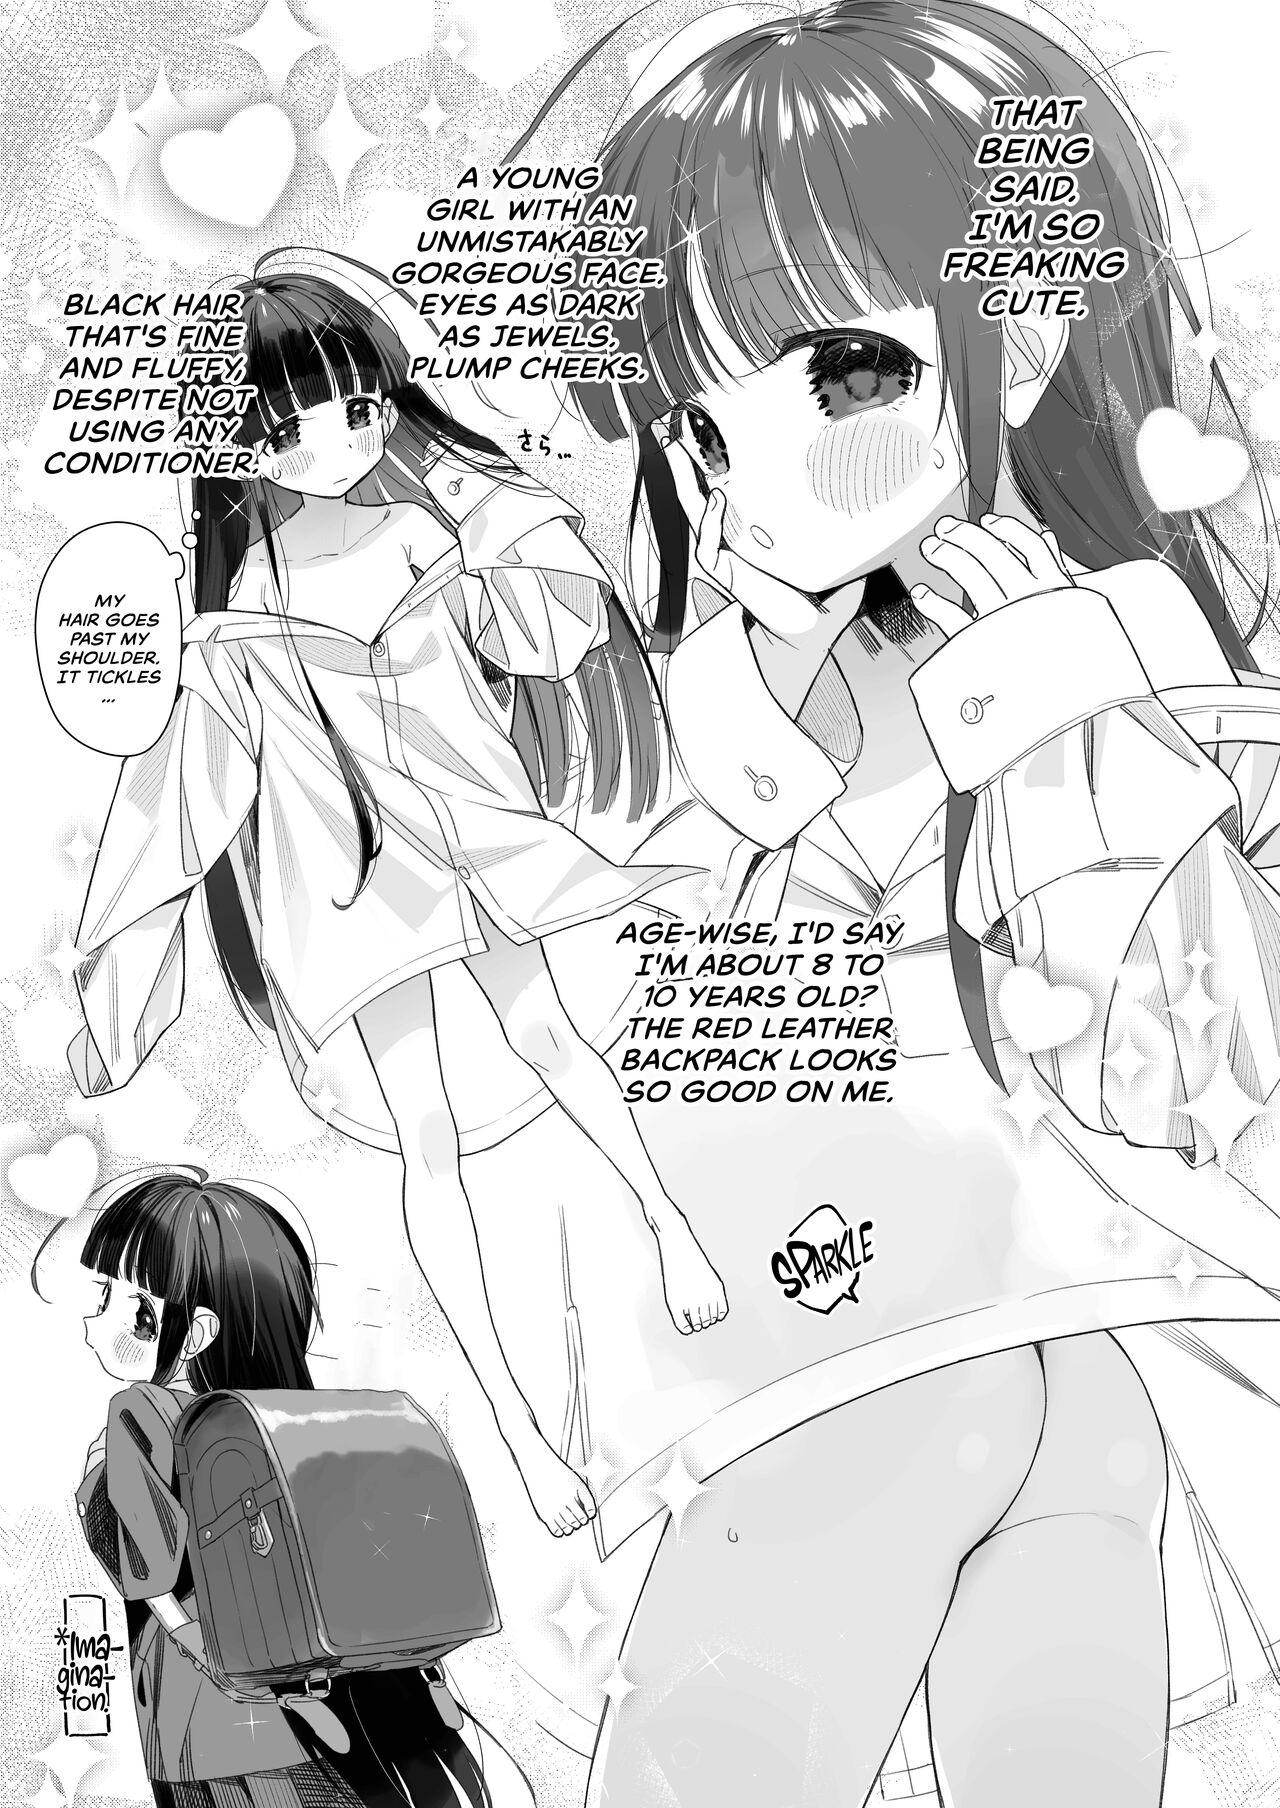 Slut Porn [Asunaro Neat. (Ronna)] TS Loli Oji-san no Bouken Onanie Hen | The Adventures of an Old Man Who Was Gender-Swapped Into a Loli ~Masturbation Chapter~ [English] [CulturedCommissions] [Digital] - Original Whooty - Page 6